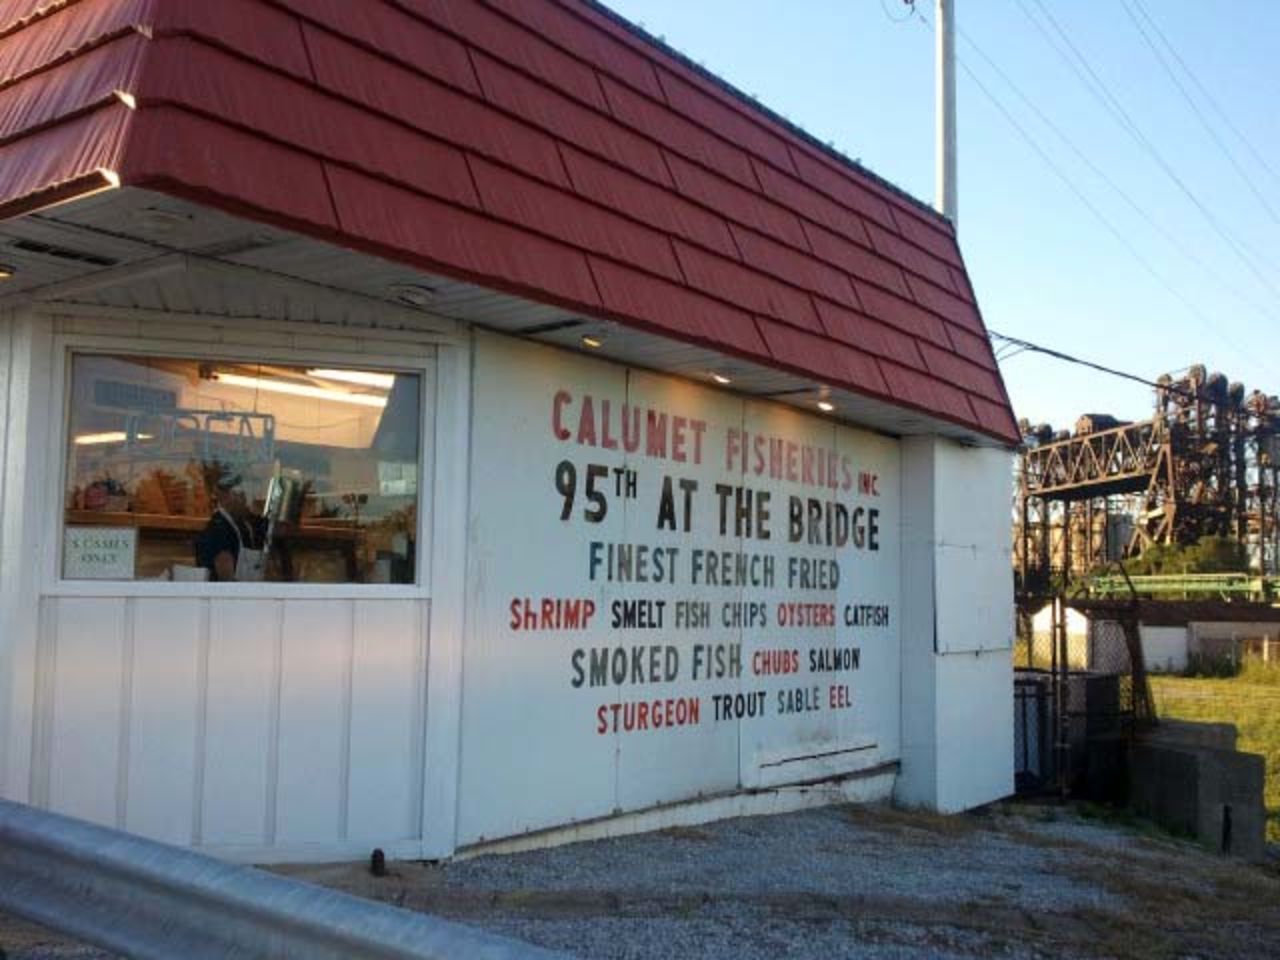 Calumet Fisheries has been attracting crowds since 1948. It's not really a restaurant, but the take-out seafood shack's smoked and fried fish make dining in the car worthwhile.